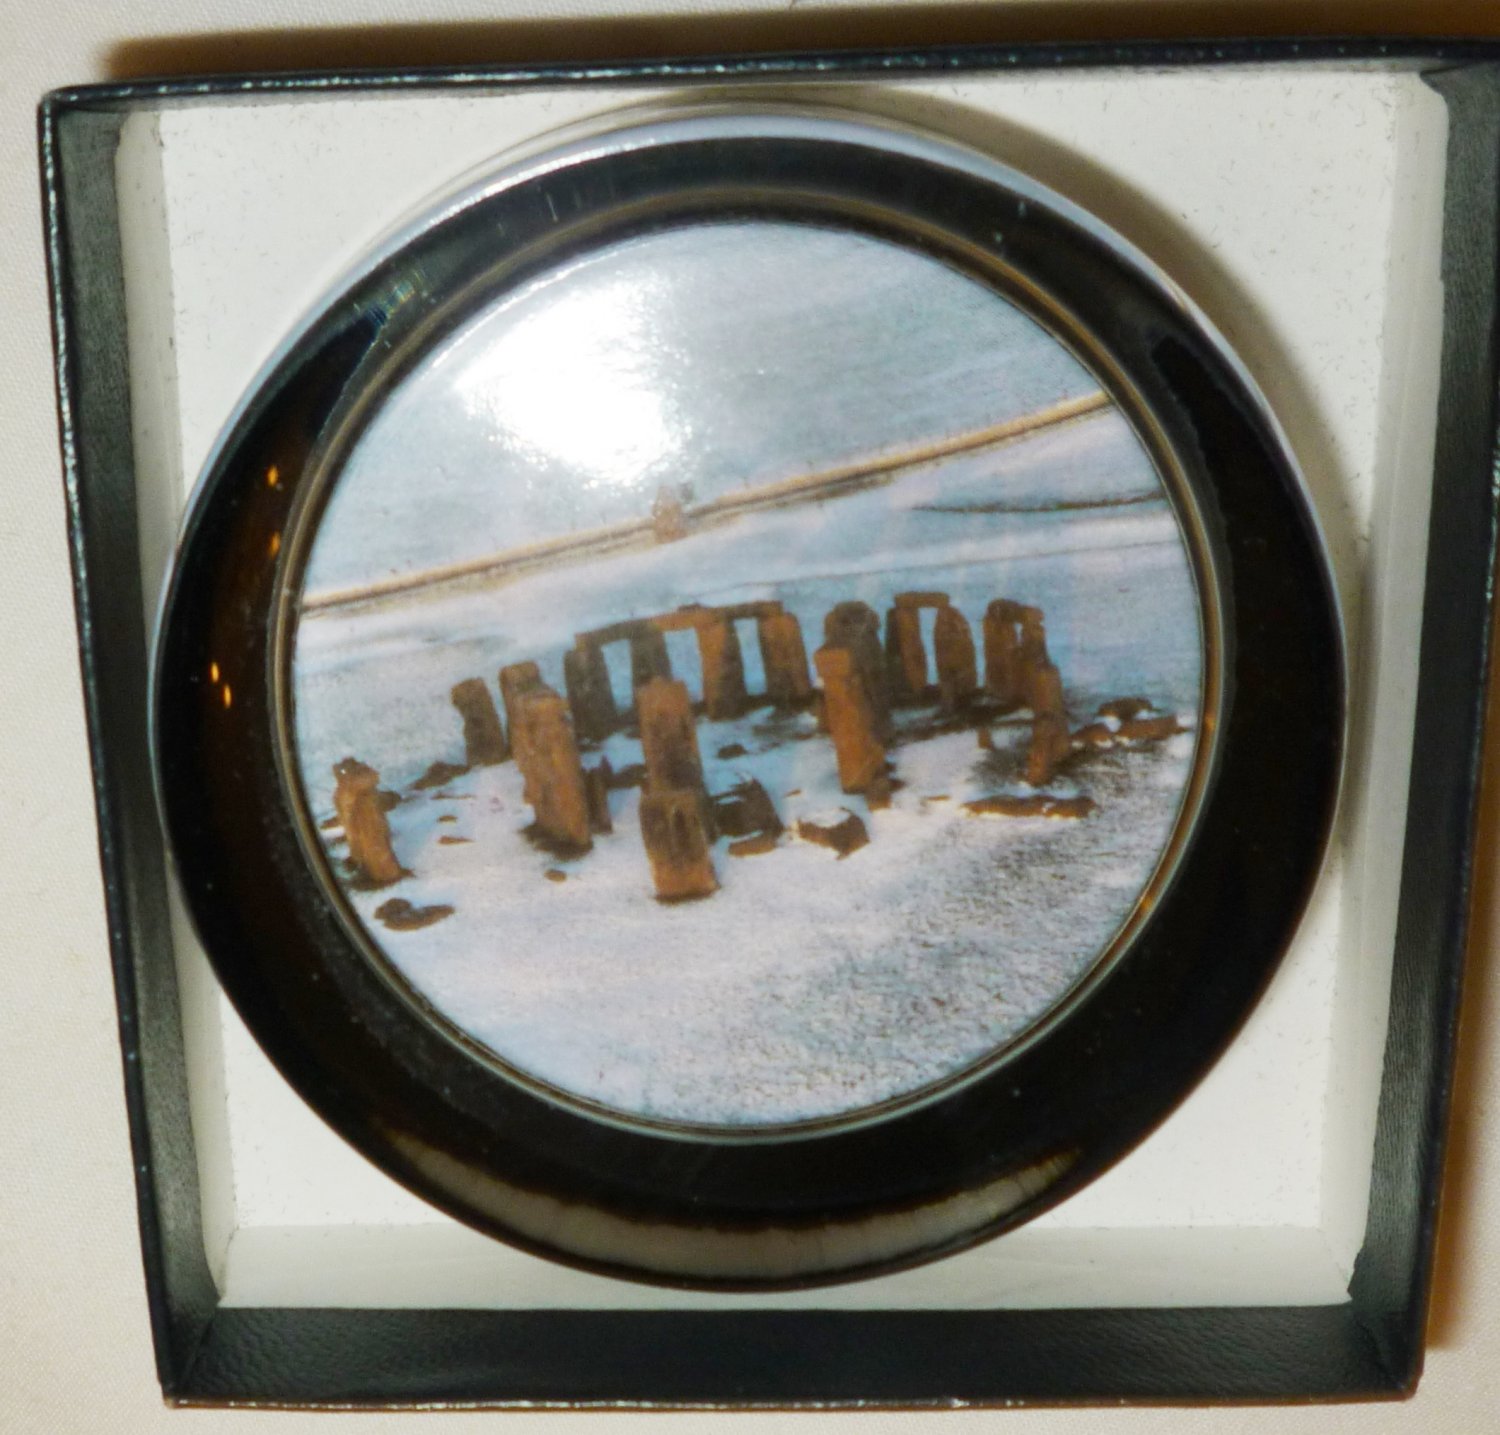 COLLECTIBLE GLASS PAPERWEIGHT STONEHENGE IN THE WINTER ENGLISH HERITAGE ENGLAND